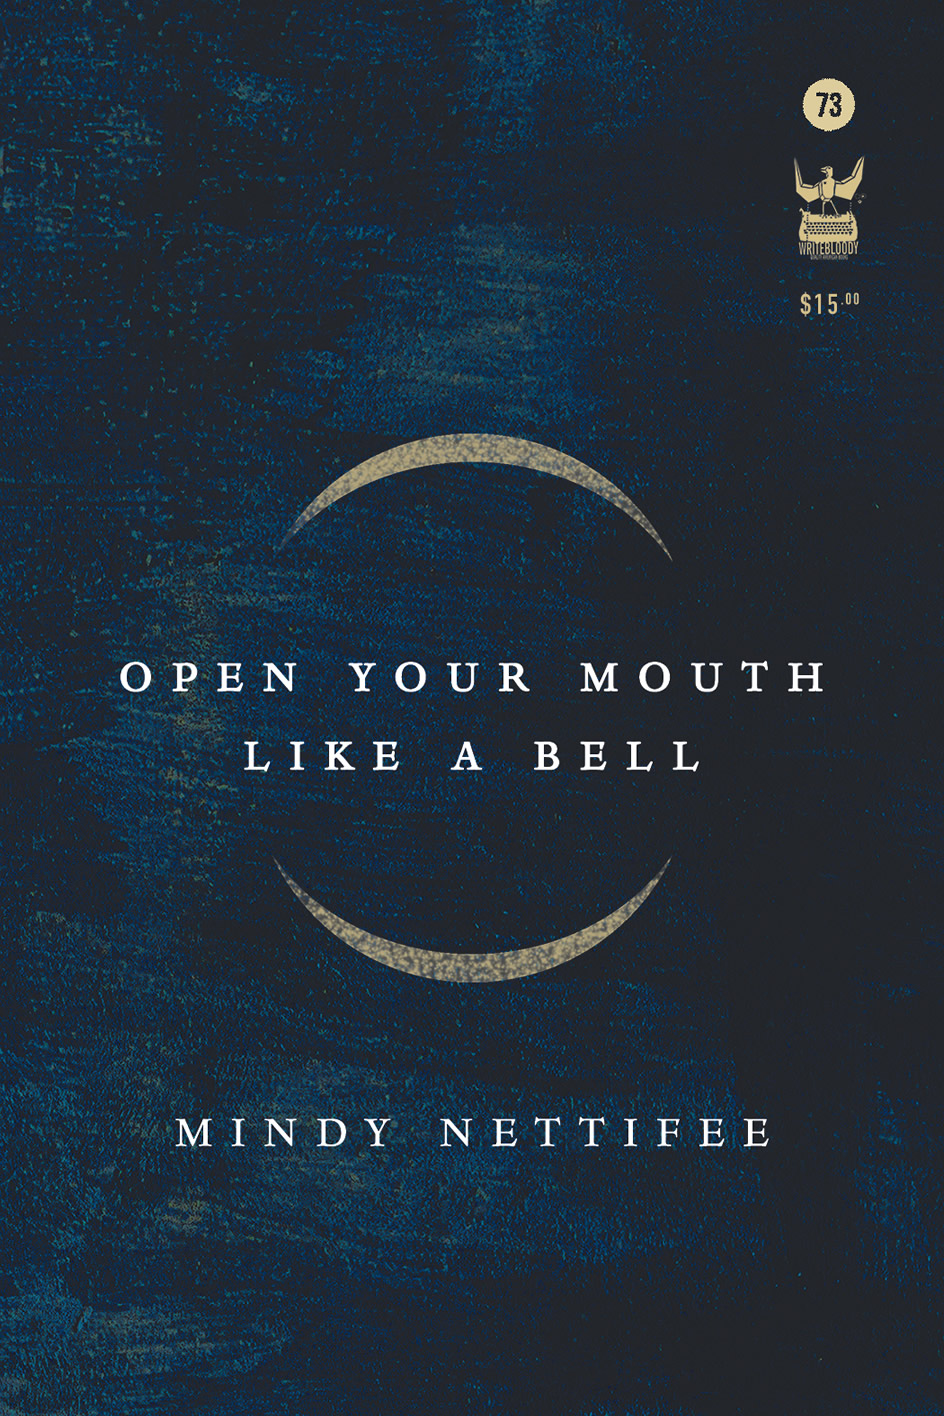 cover art for poetry collection Open Your Mouth Like a Bell